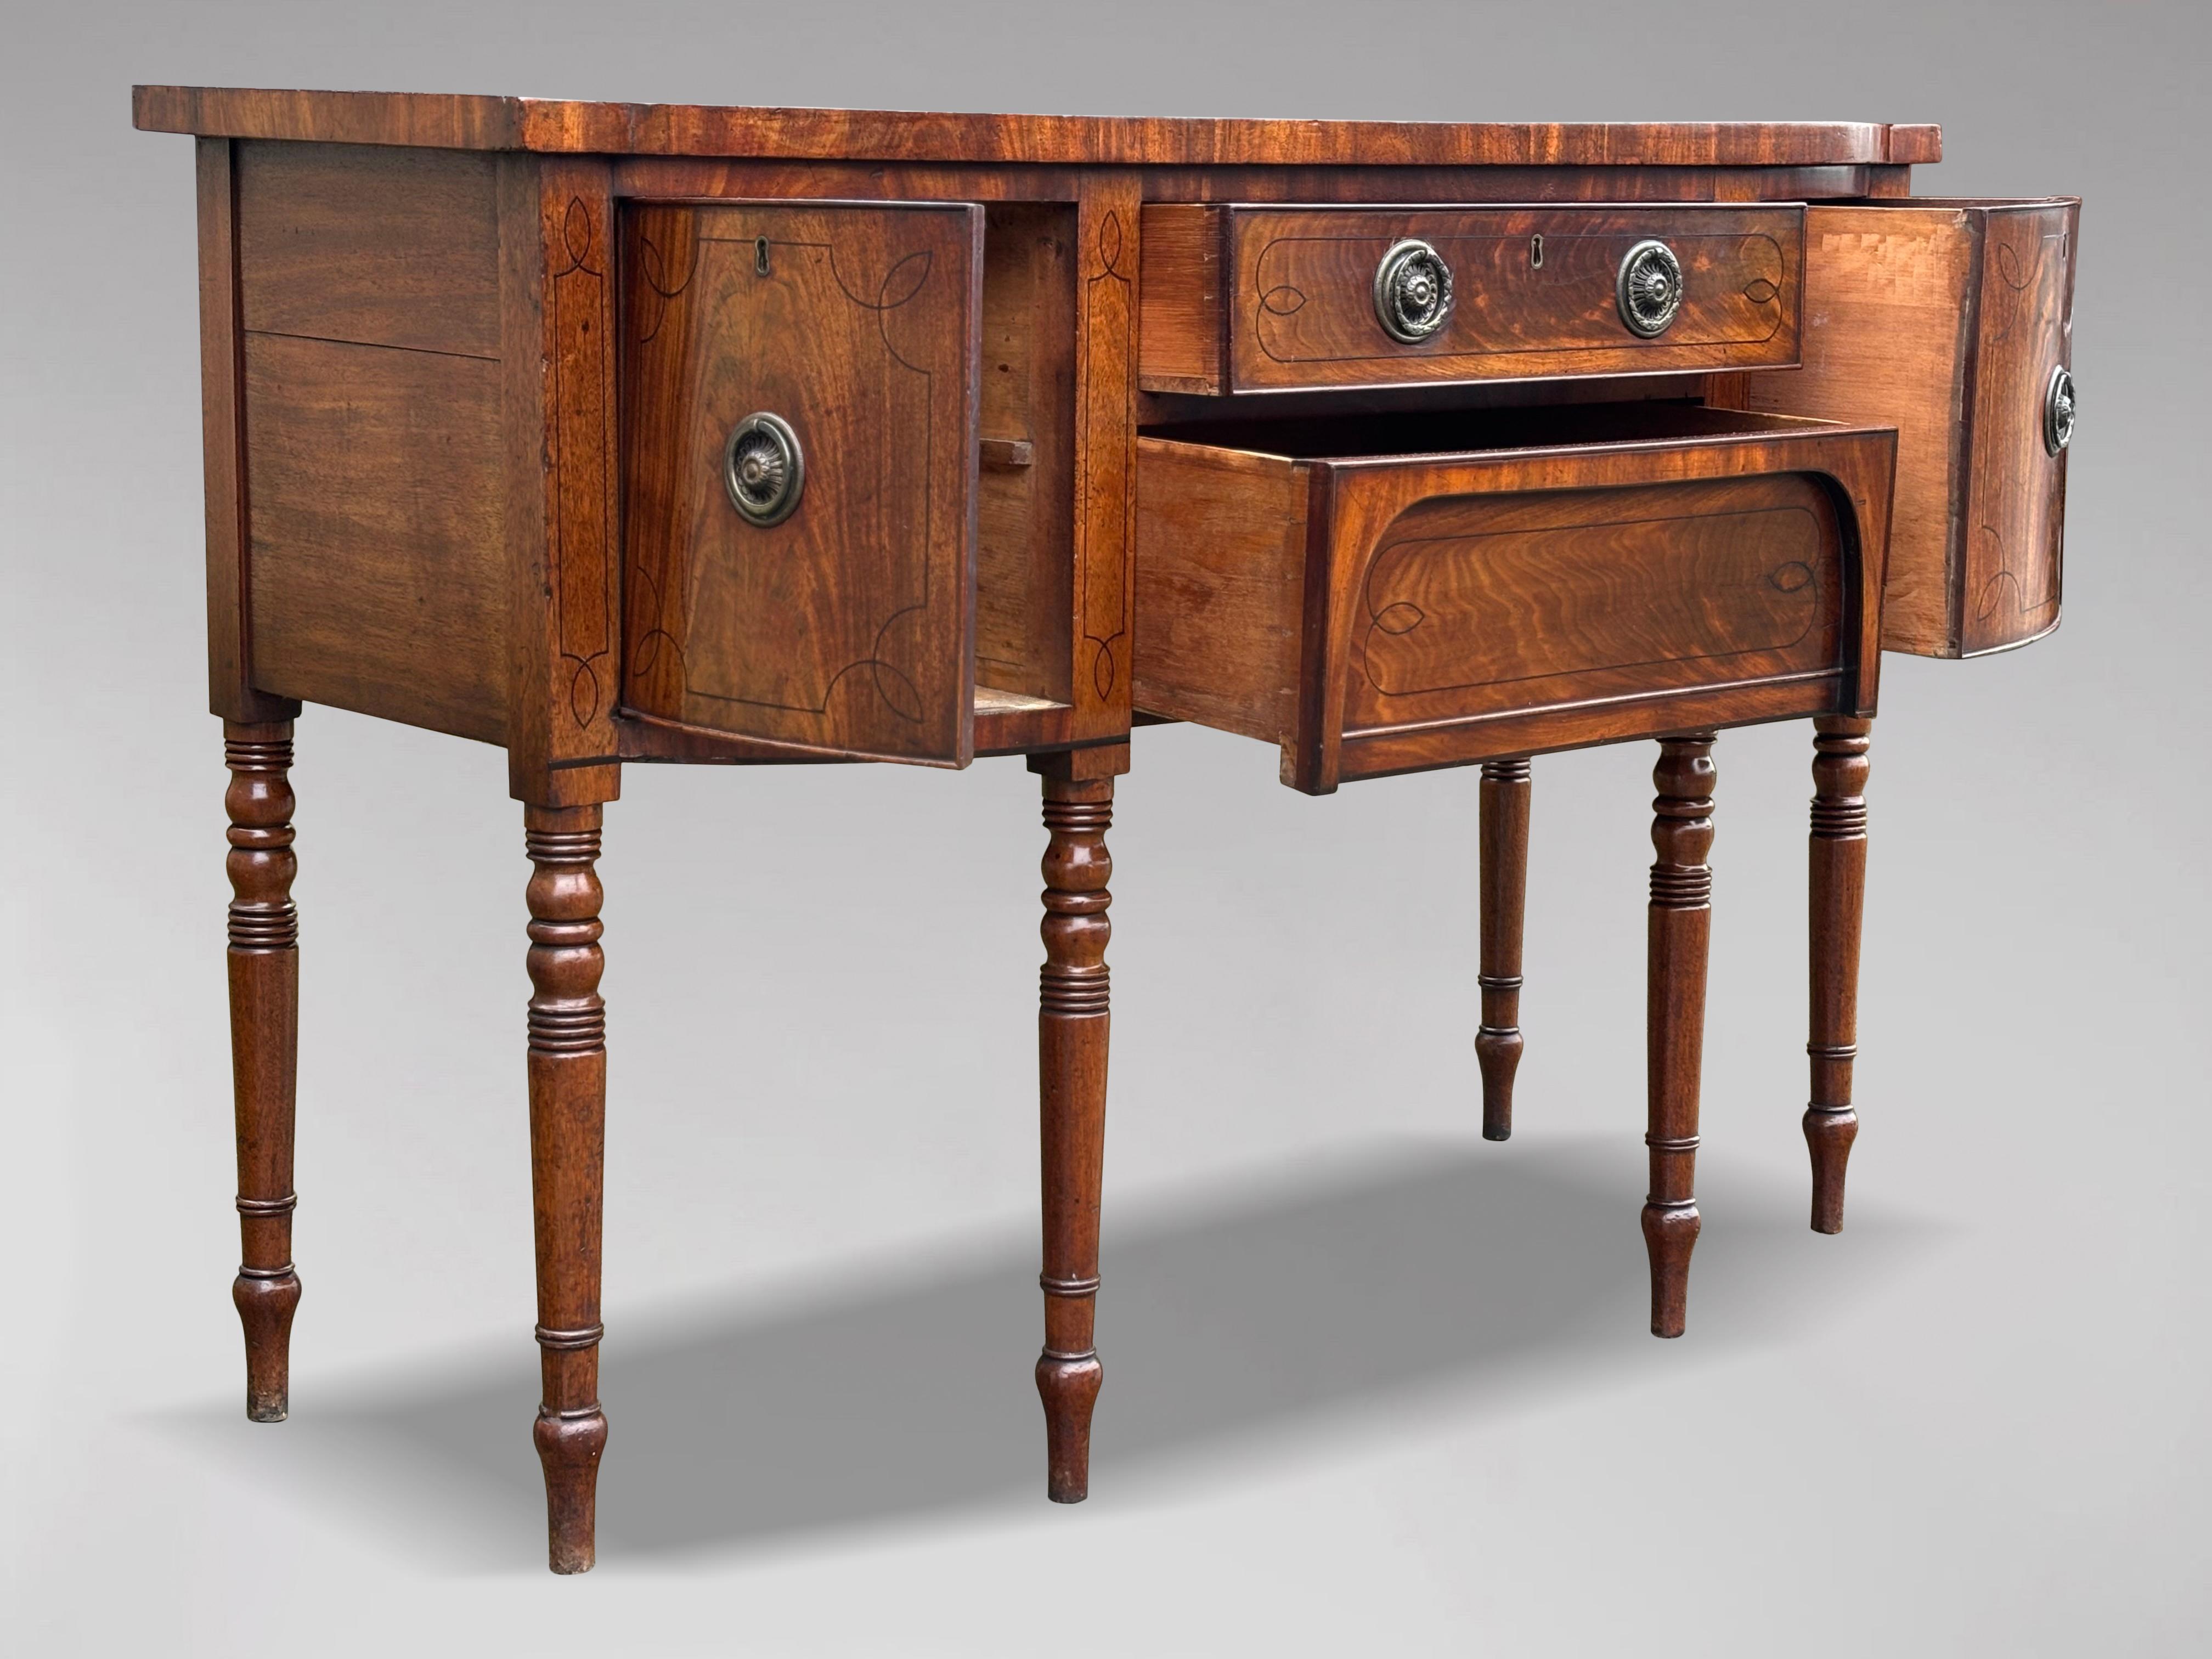 Early 19th Century George III Period Sideboard In Good Condition For Sale In Petworth,West Sussex, GB